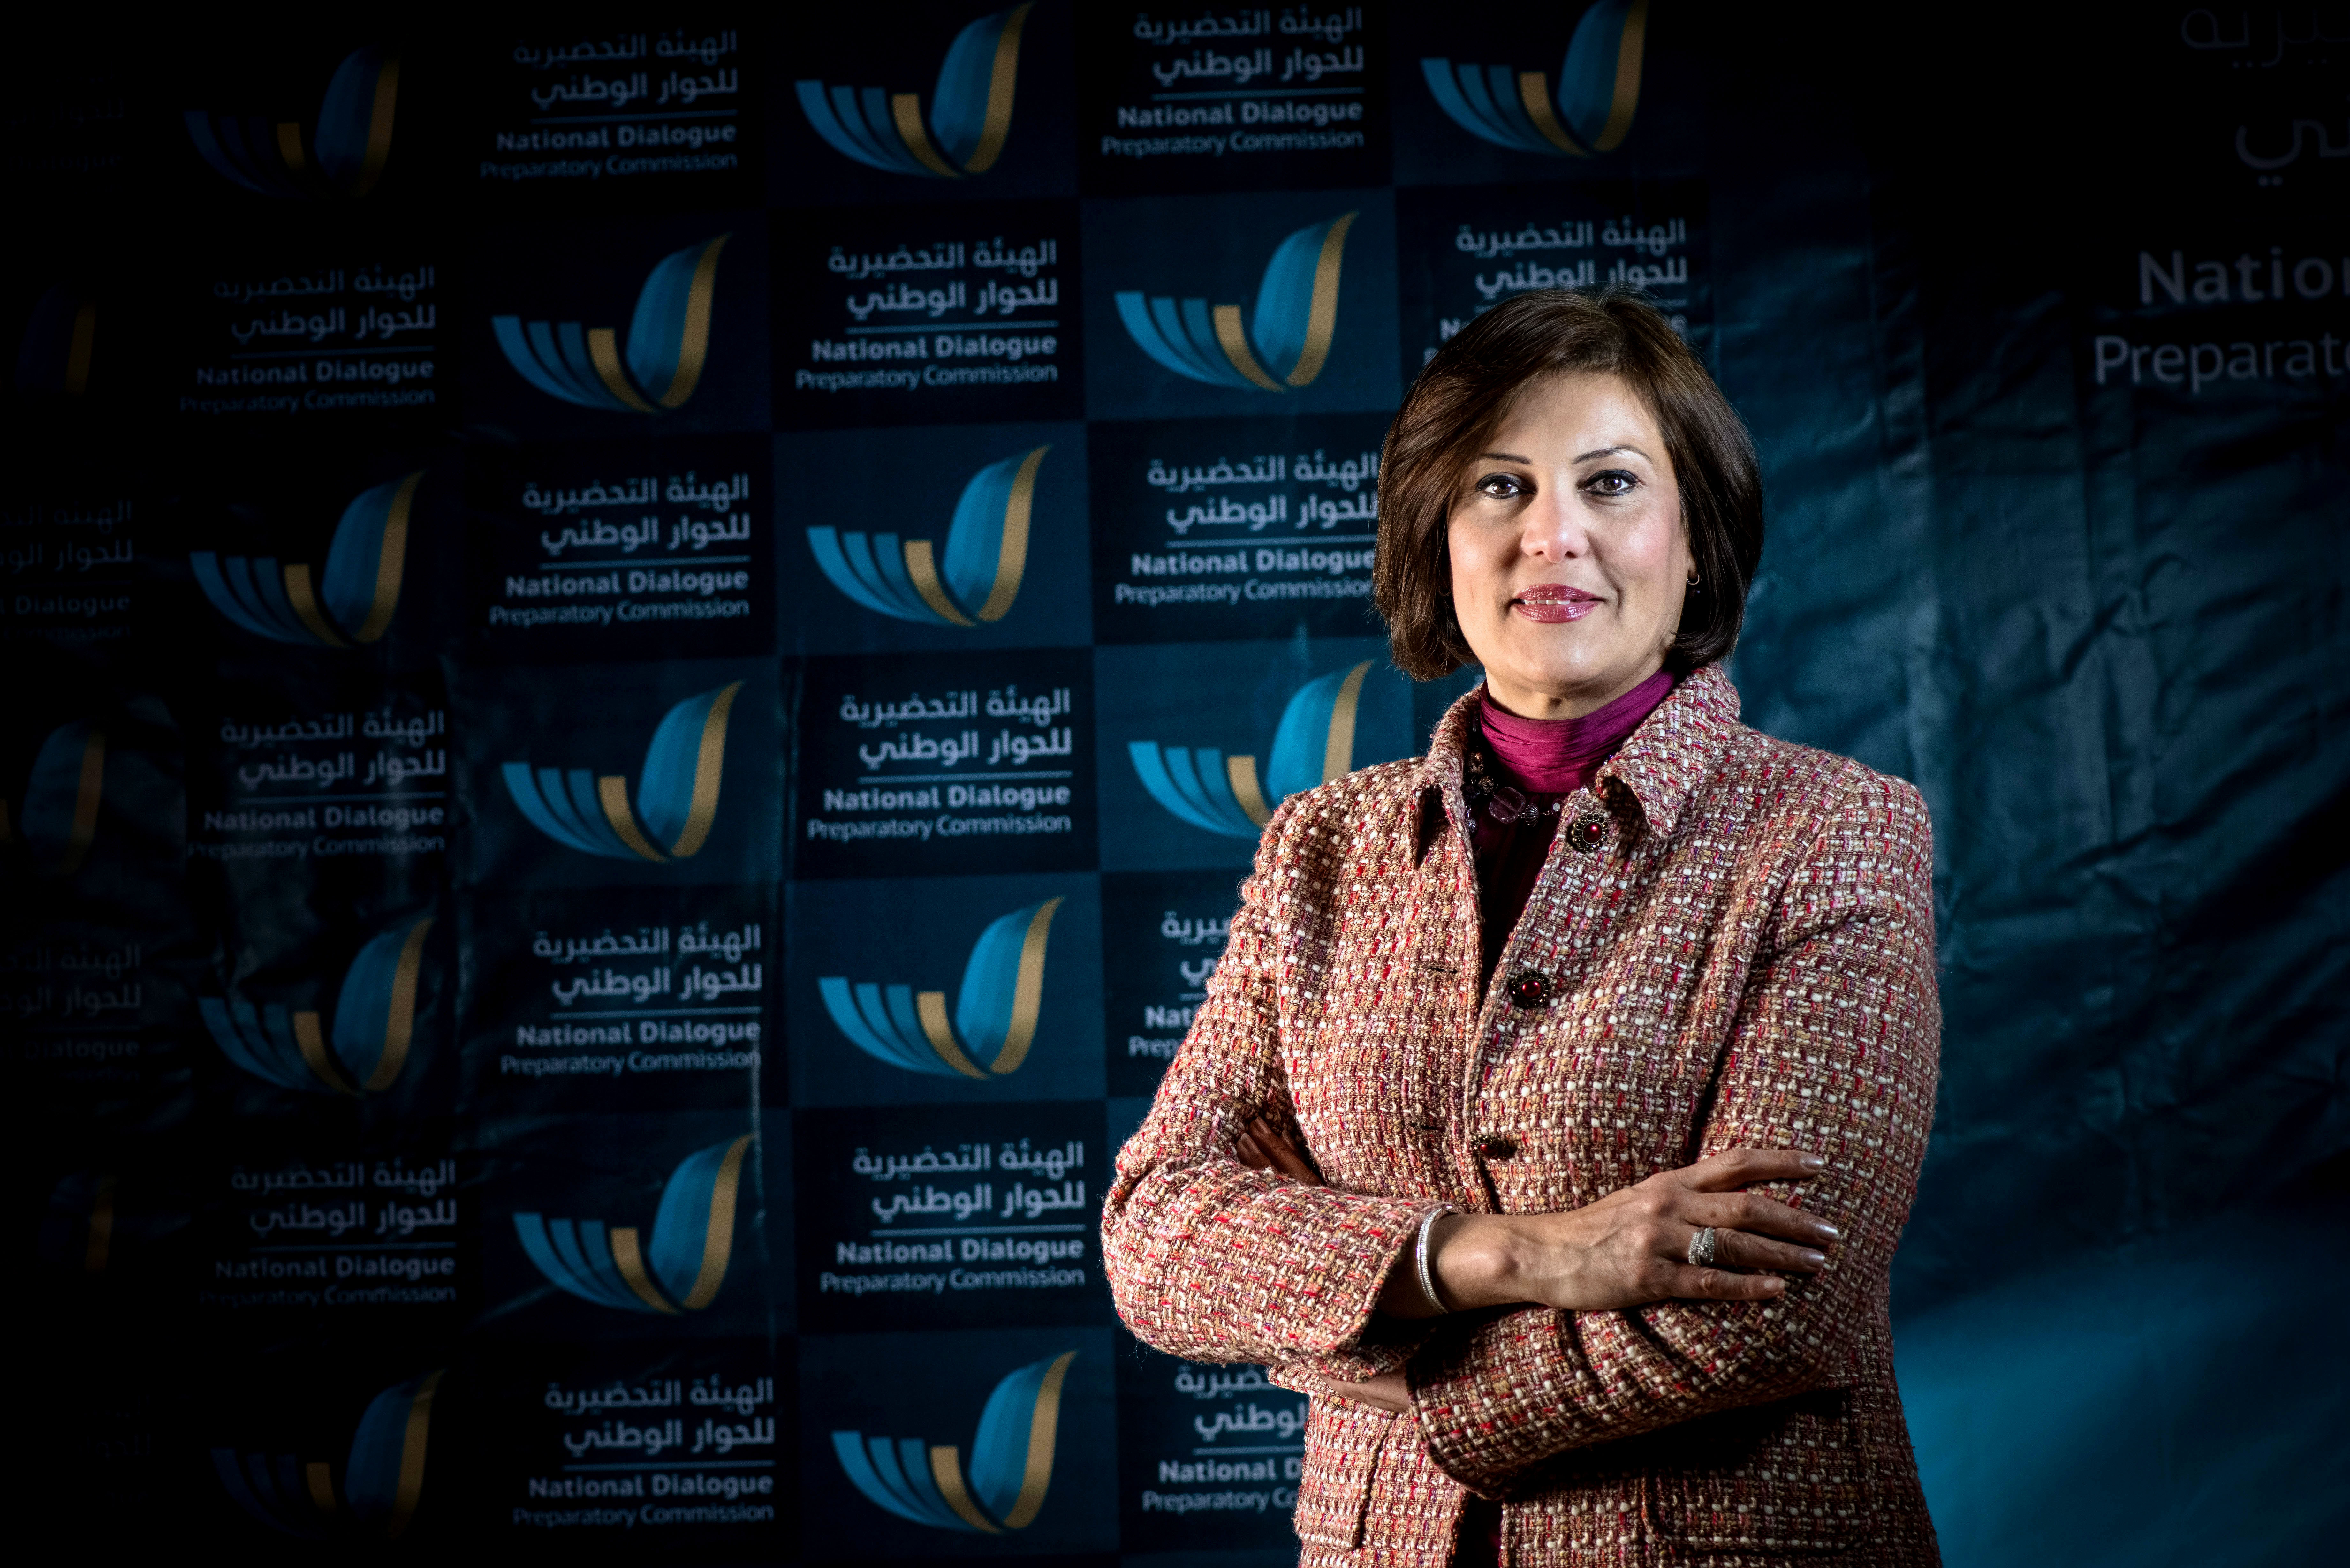 In this March 2014 image, Salwa Bugaighis, lawyer and rights activist, poses for a photograph during a meeting in Tripoli, Libya, AP Photo/National Dialogue Preparatory Commission